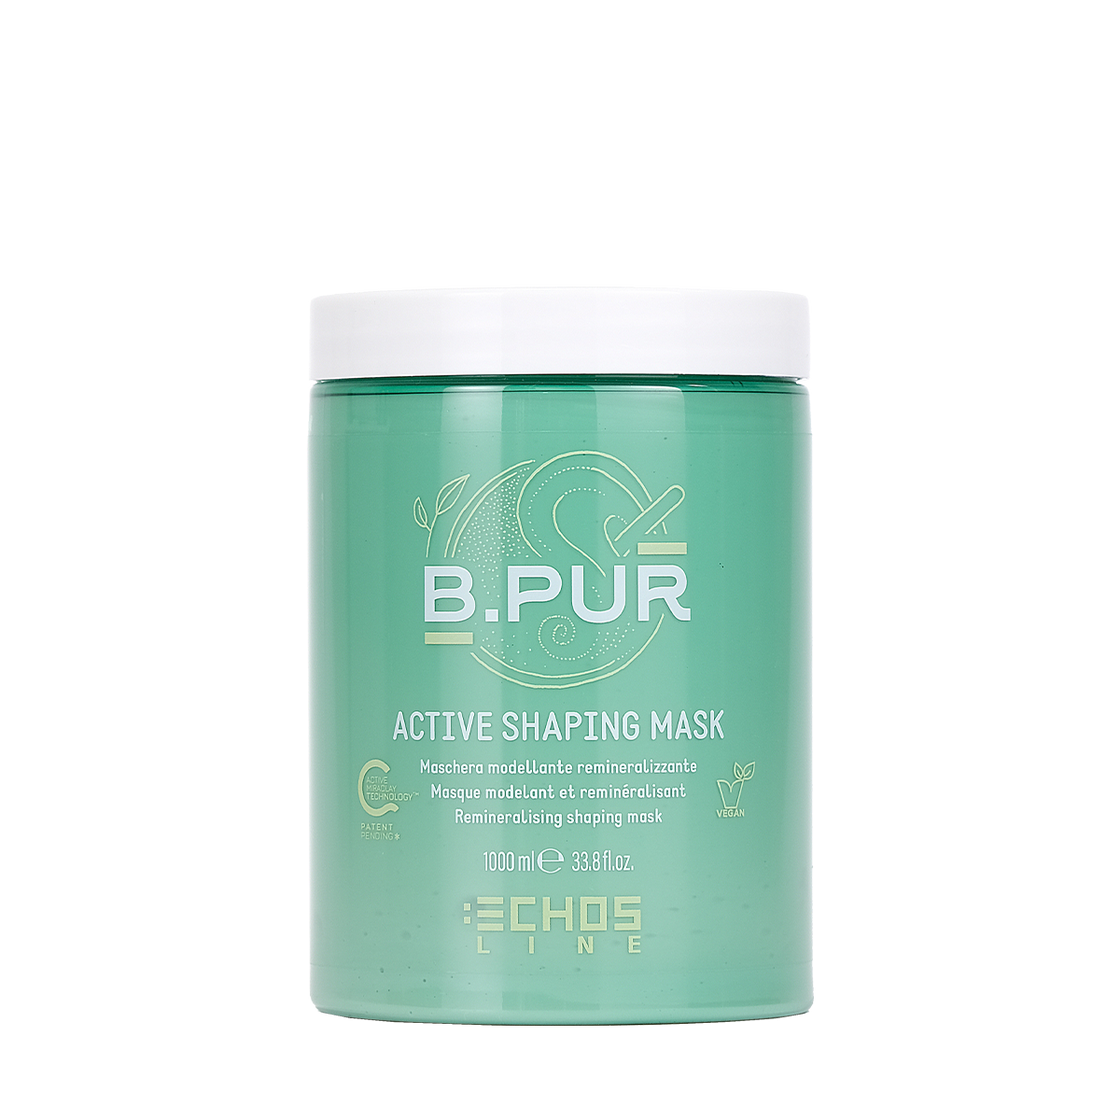 ECHOS B.PUR ACTIVE SHAPING MASK NEW 1000 ML